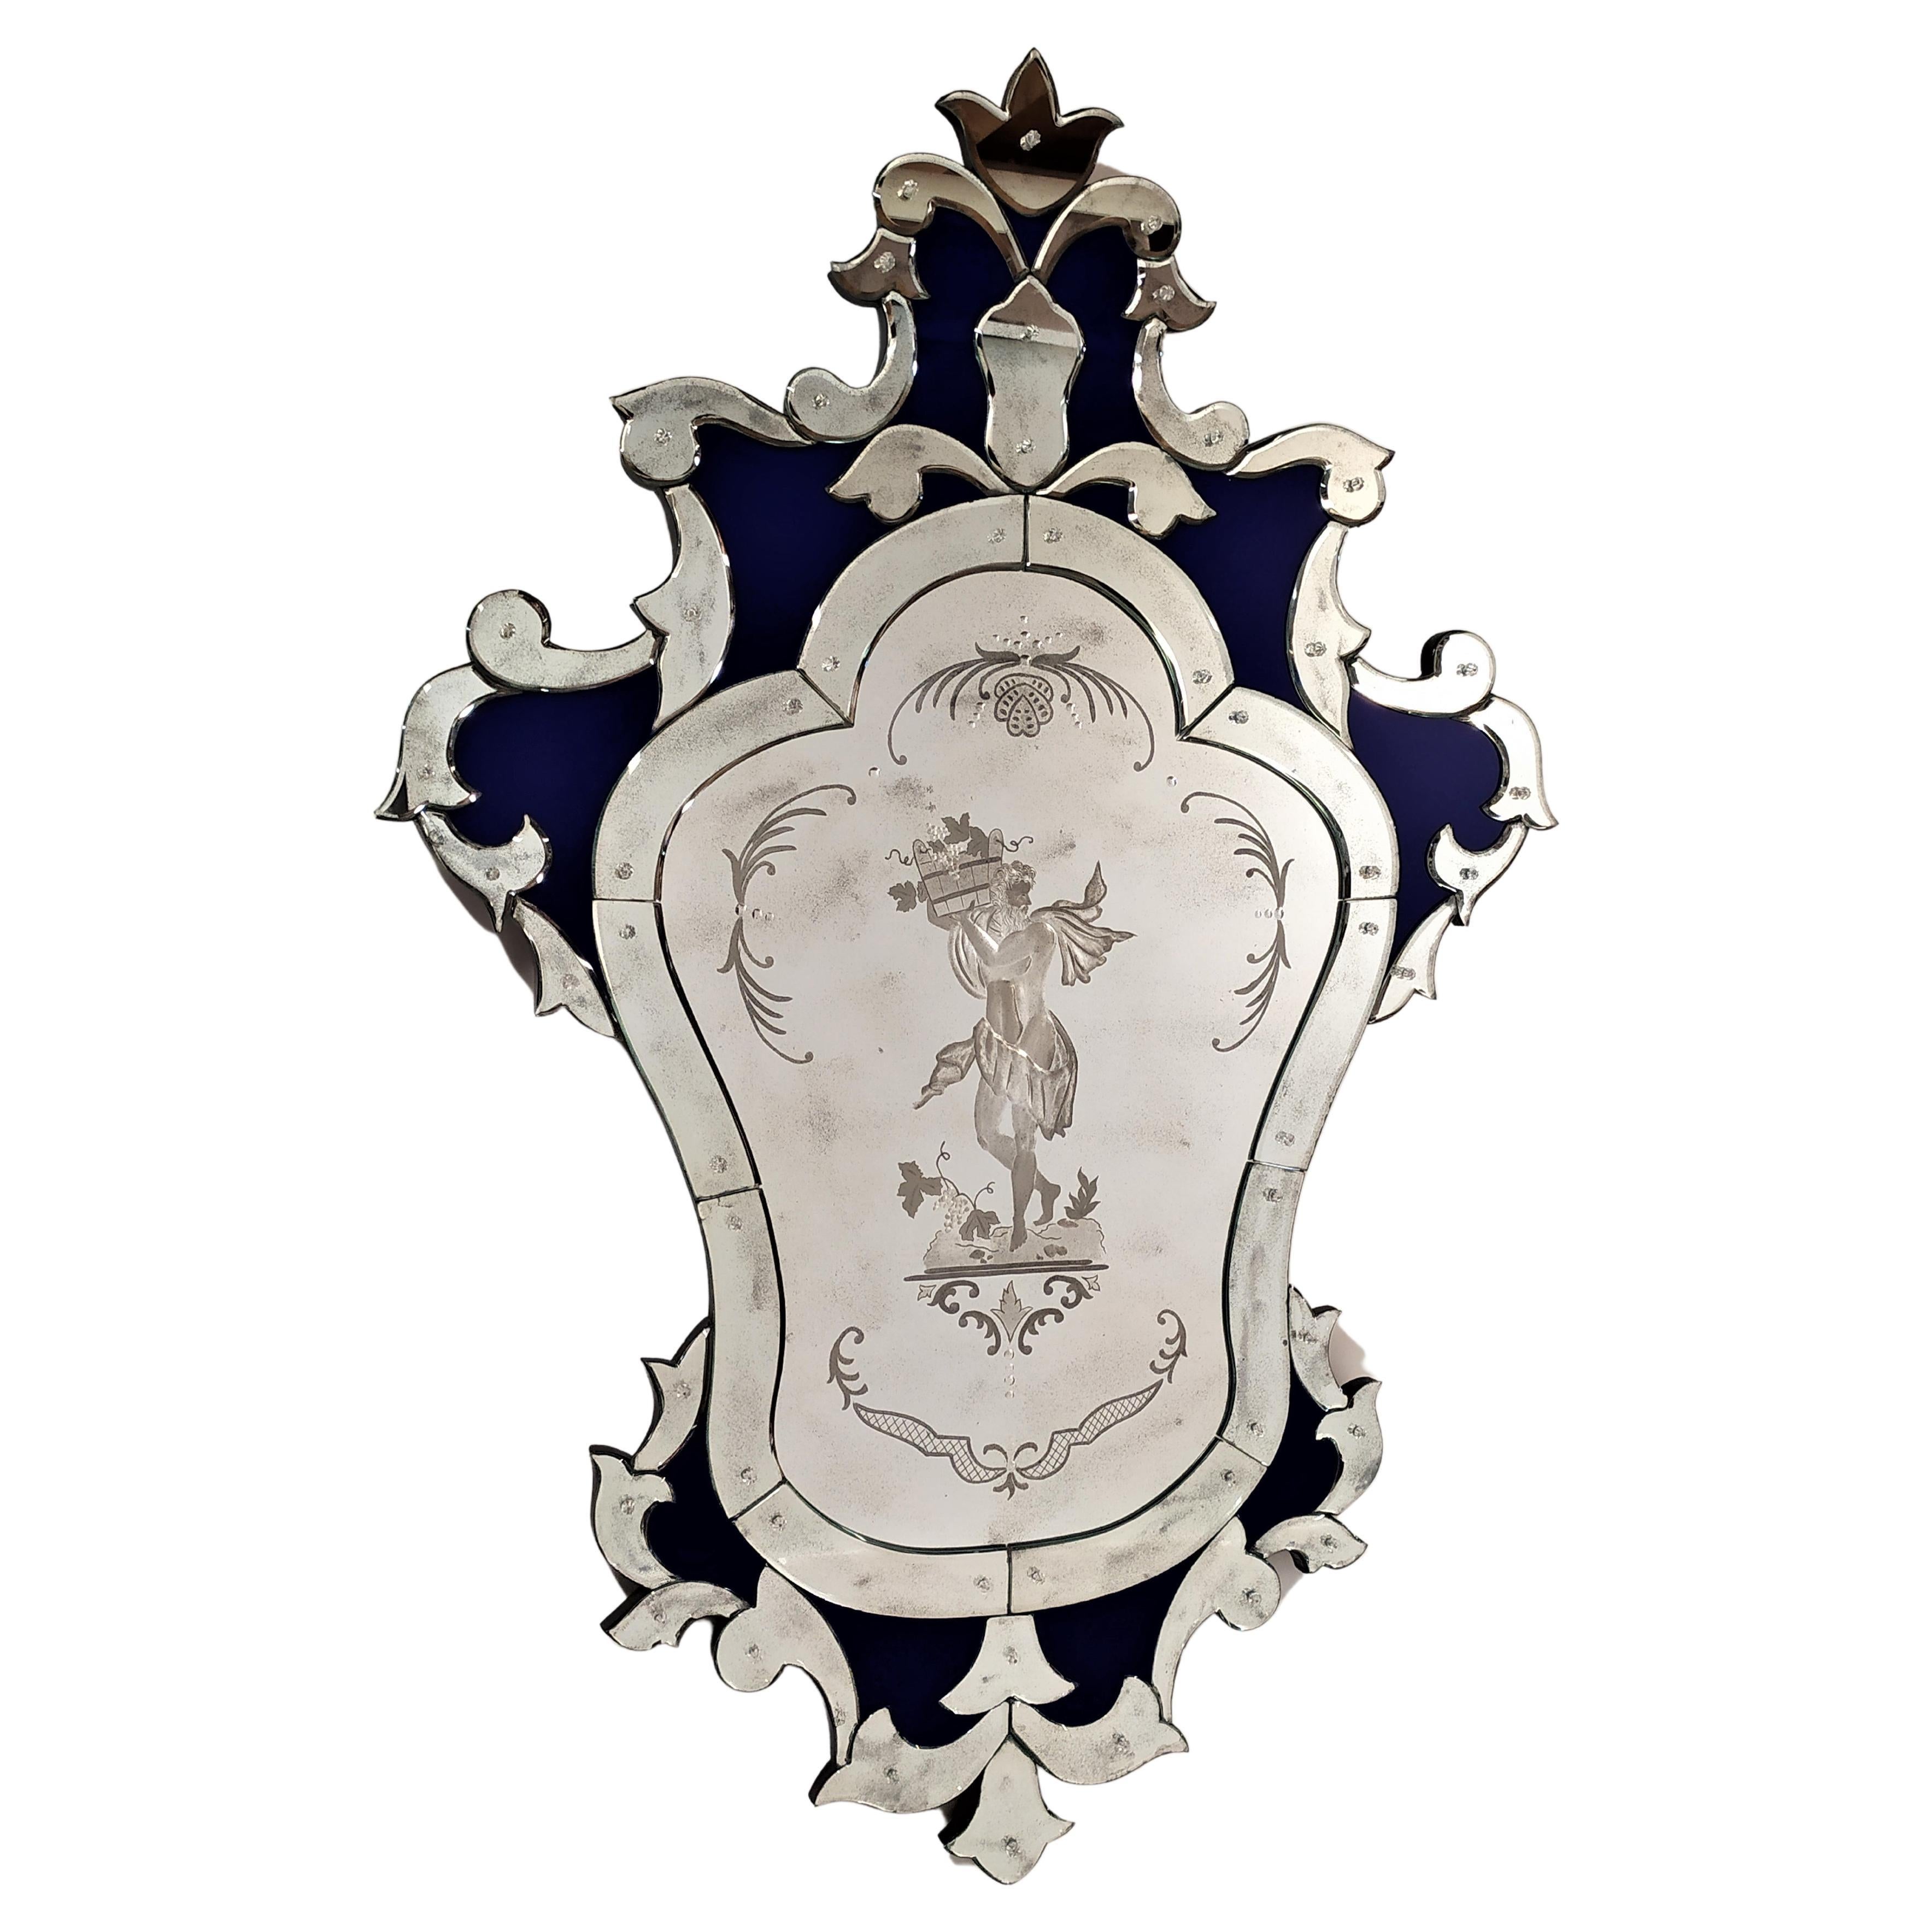 "Bacchus" Reproduction of Antique Murano Glass Mirror, by Fratelli Tosi For Sale